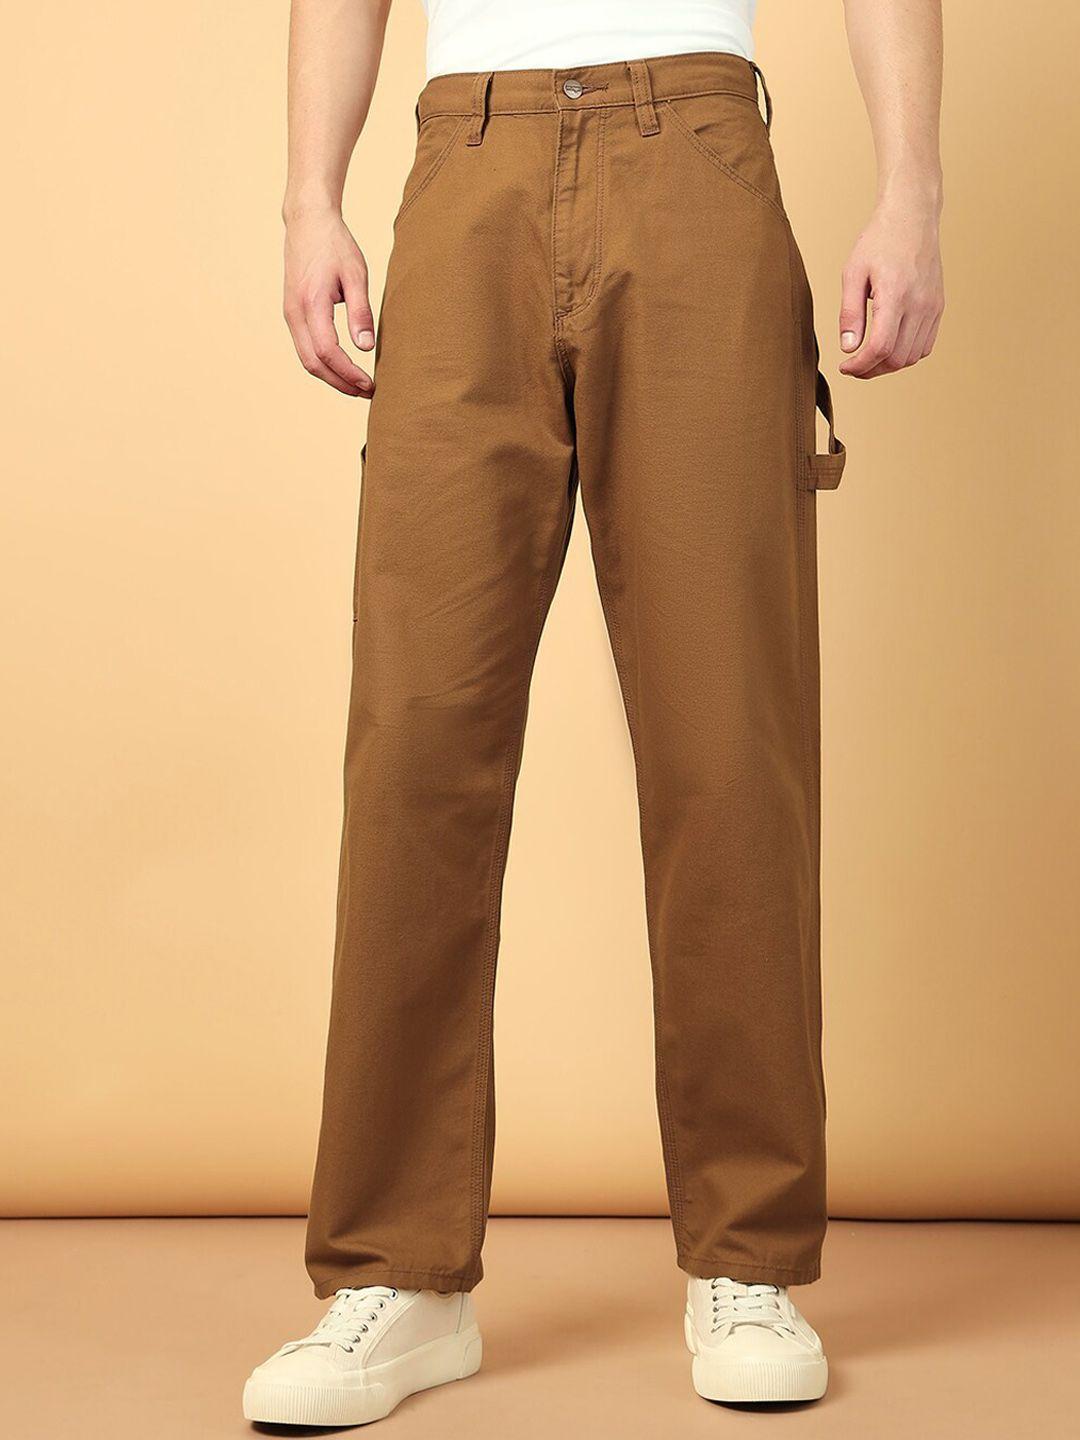 wrangler-men-loose-fit-low-rise-chinos-trousers